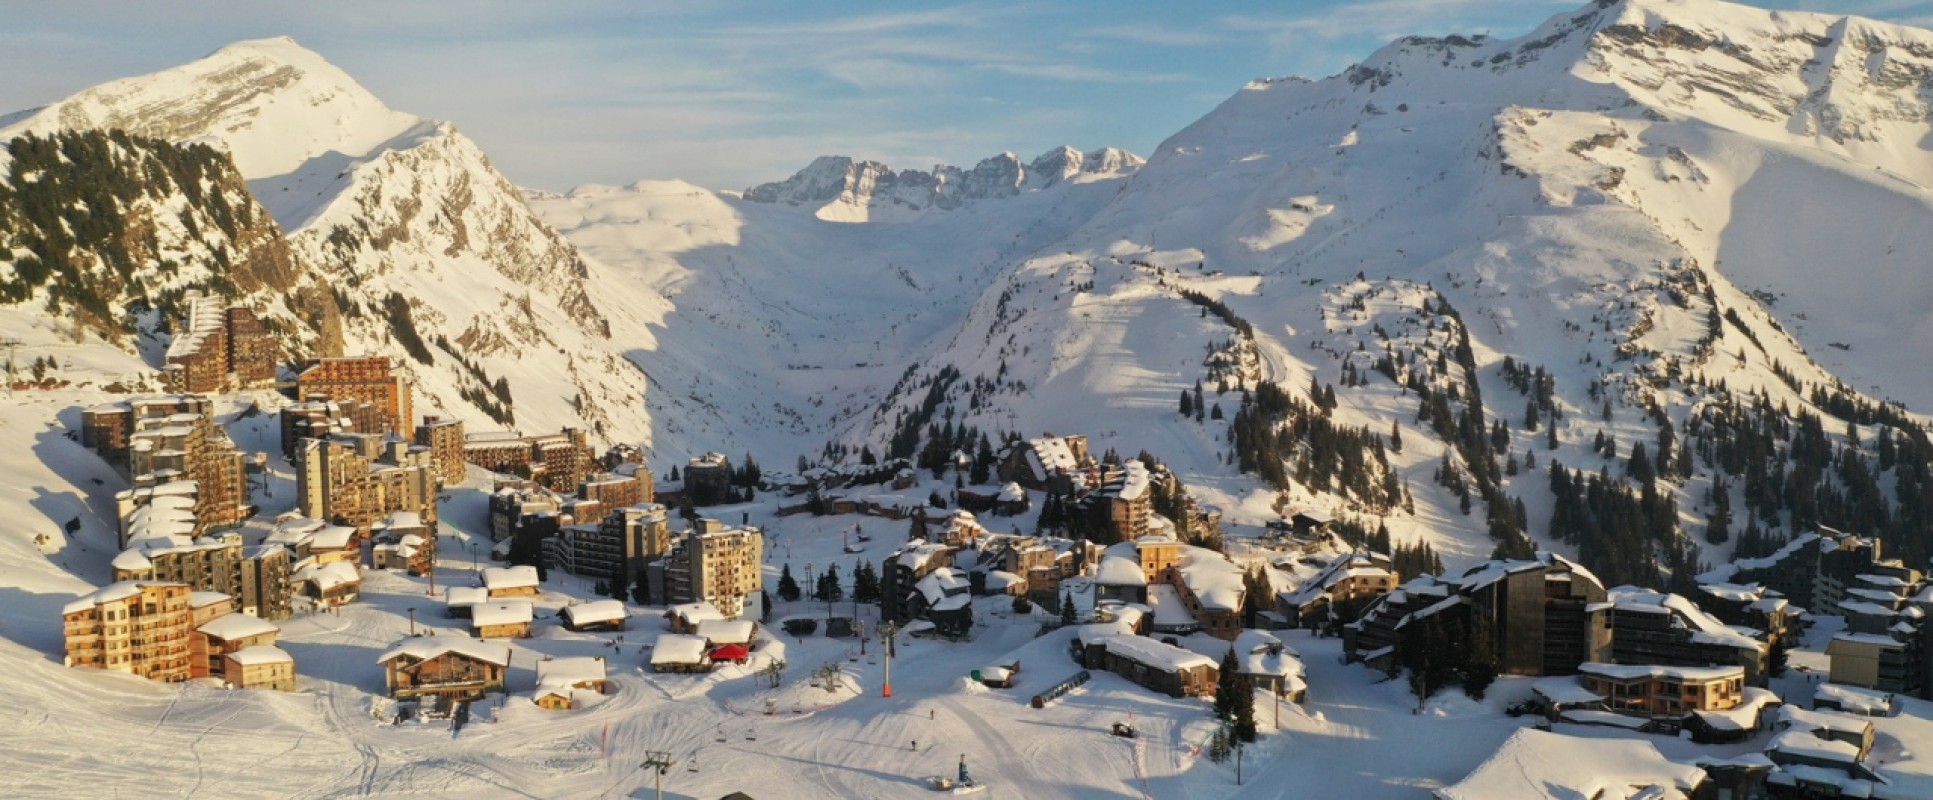 Last Minute Cheap Chalet Skiing Holidays